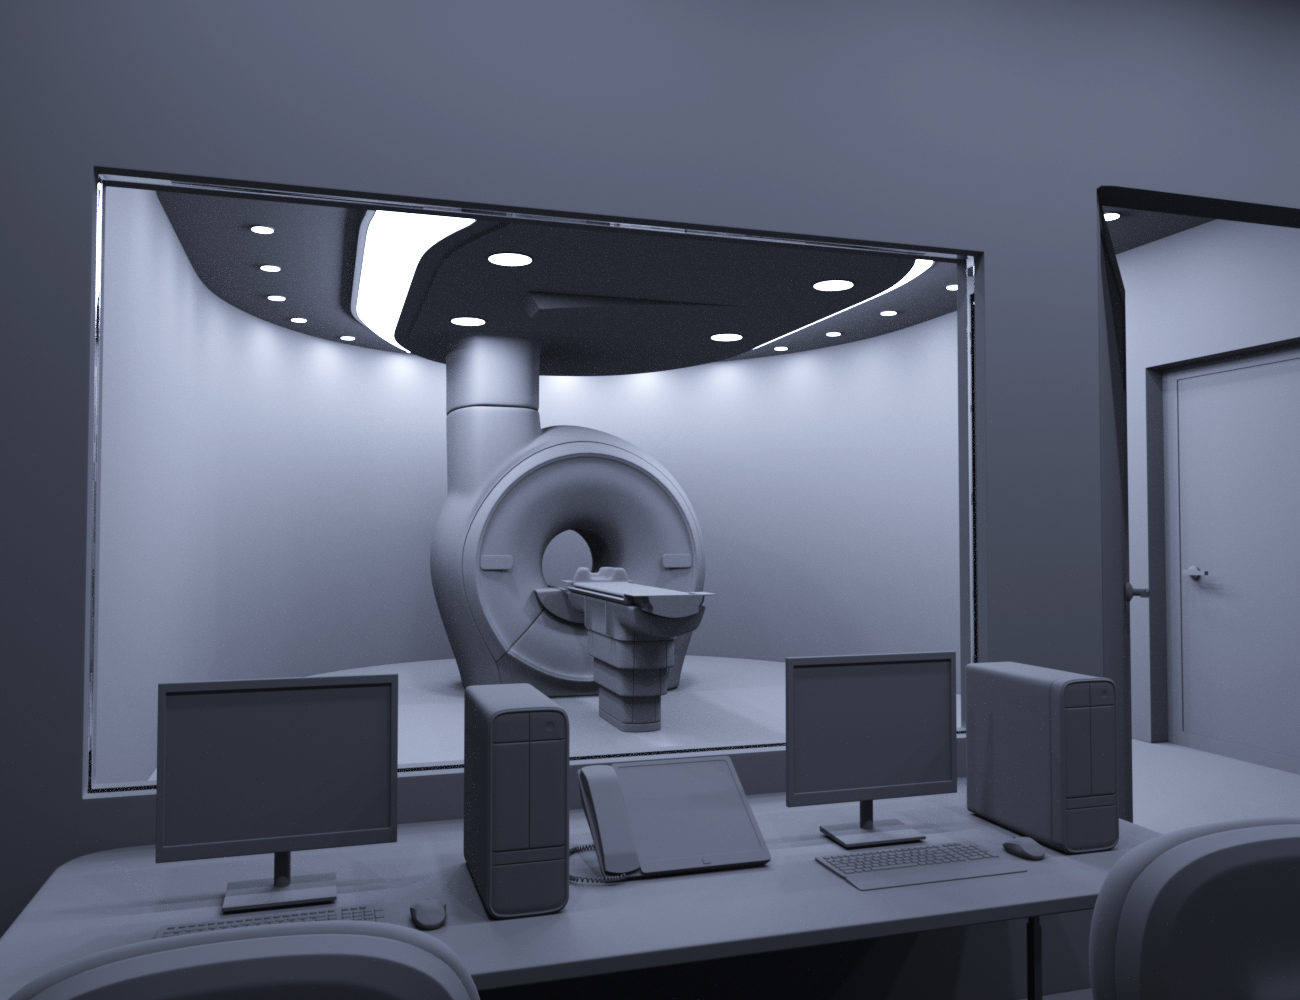 MRI Room by: Charlie, 3D Models by Daz 3D